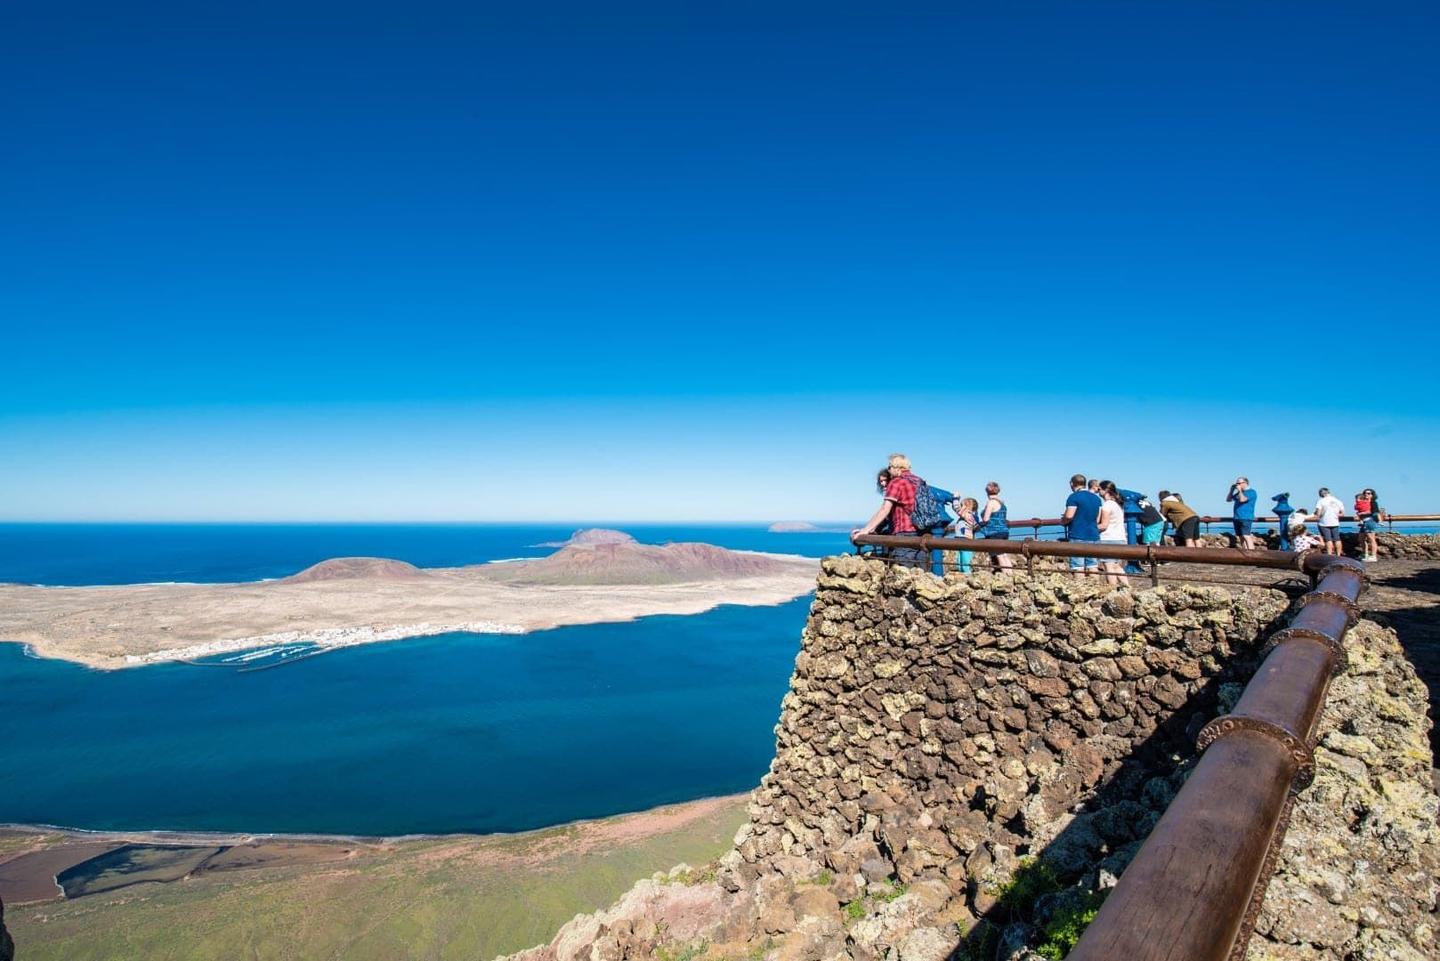 Tourists enjoying the scenic view from the Mirador del Río viewpoint in Lanzarote, overlooking the ocean and La Graciosa island under a clear blue sky.